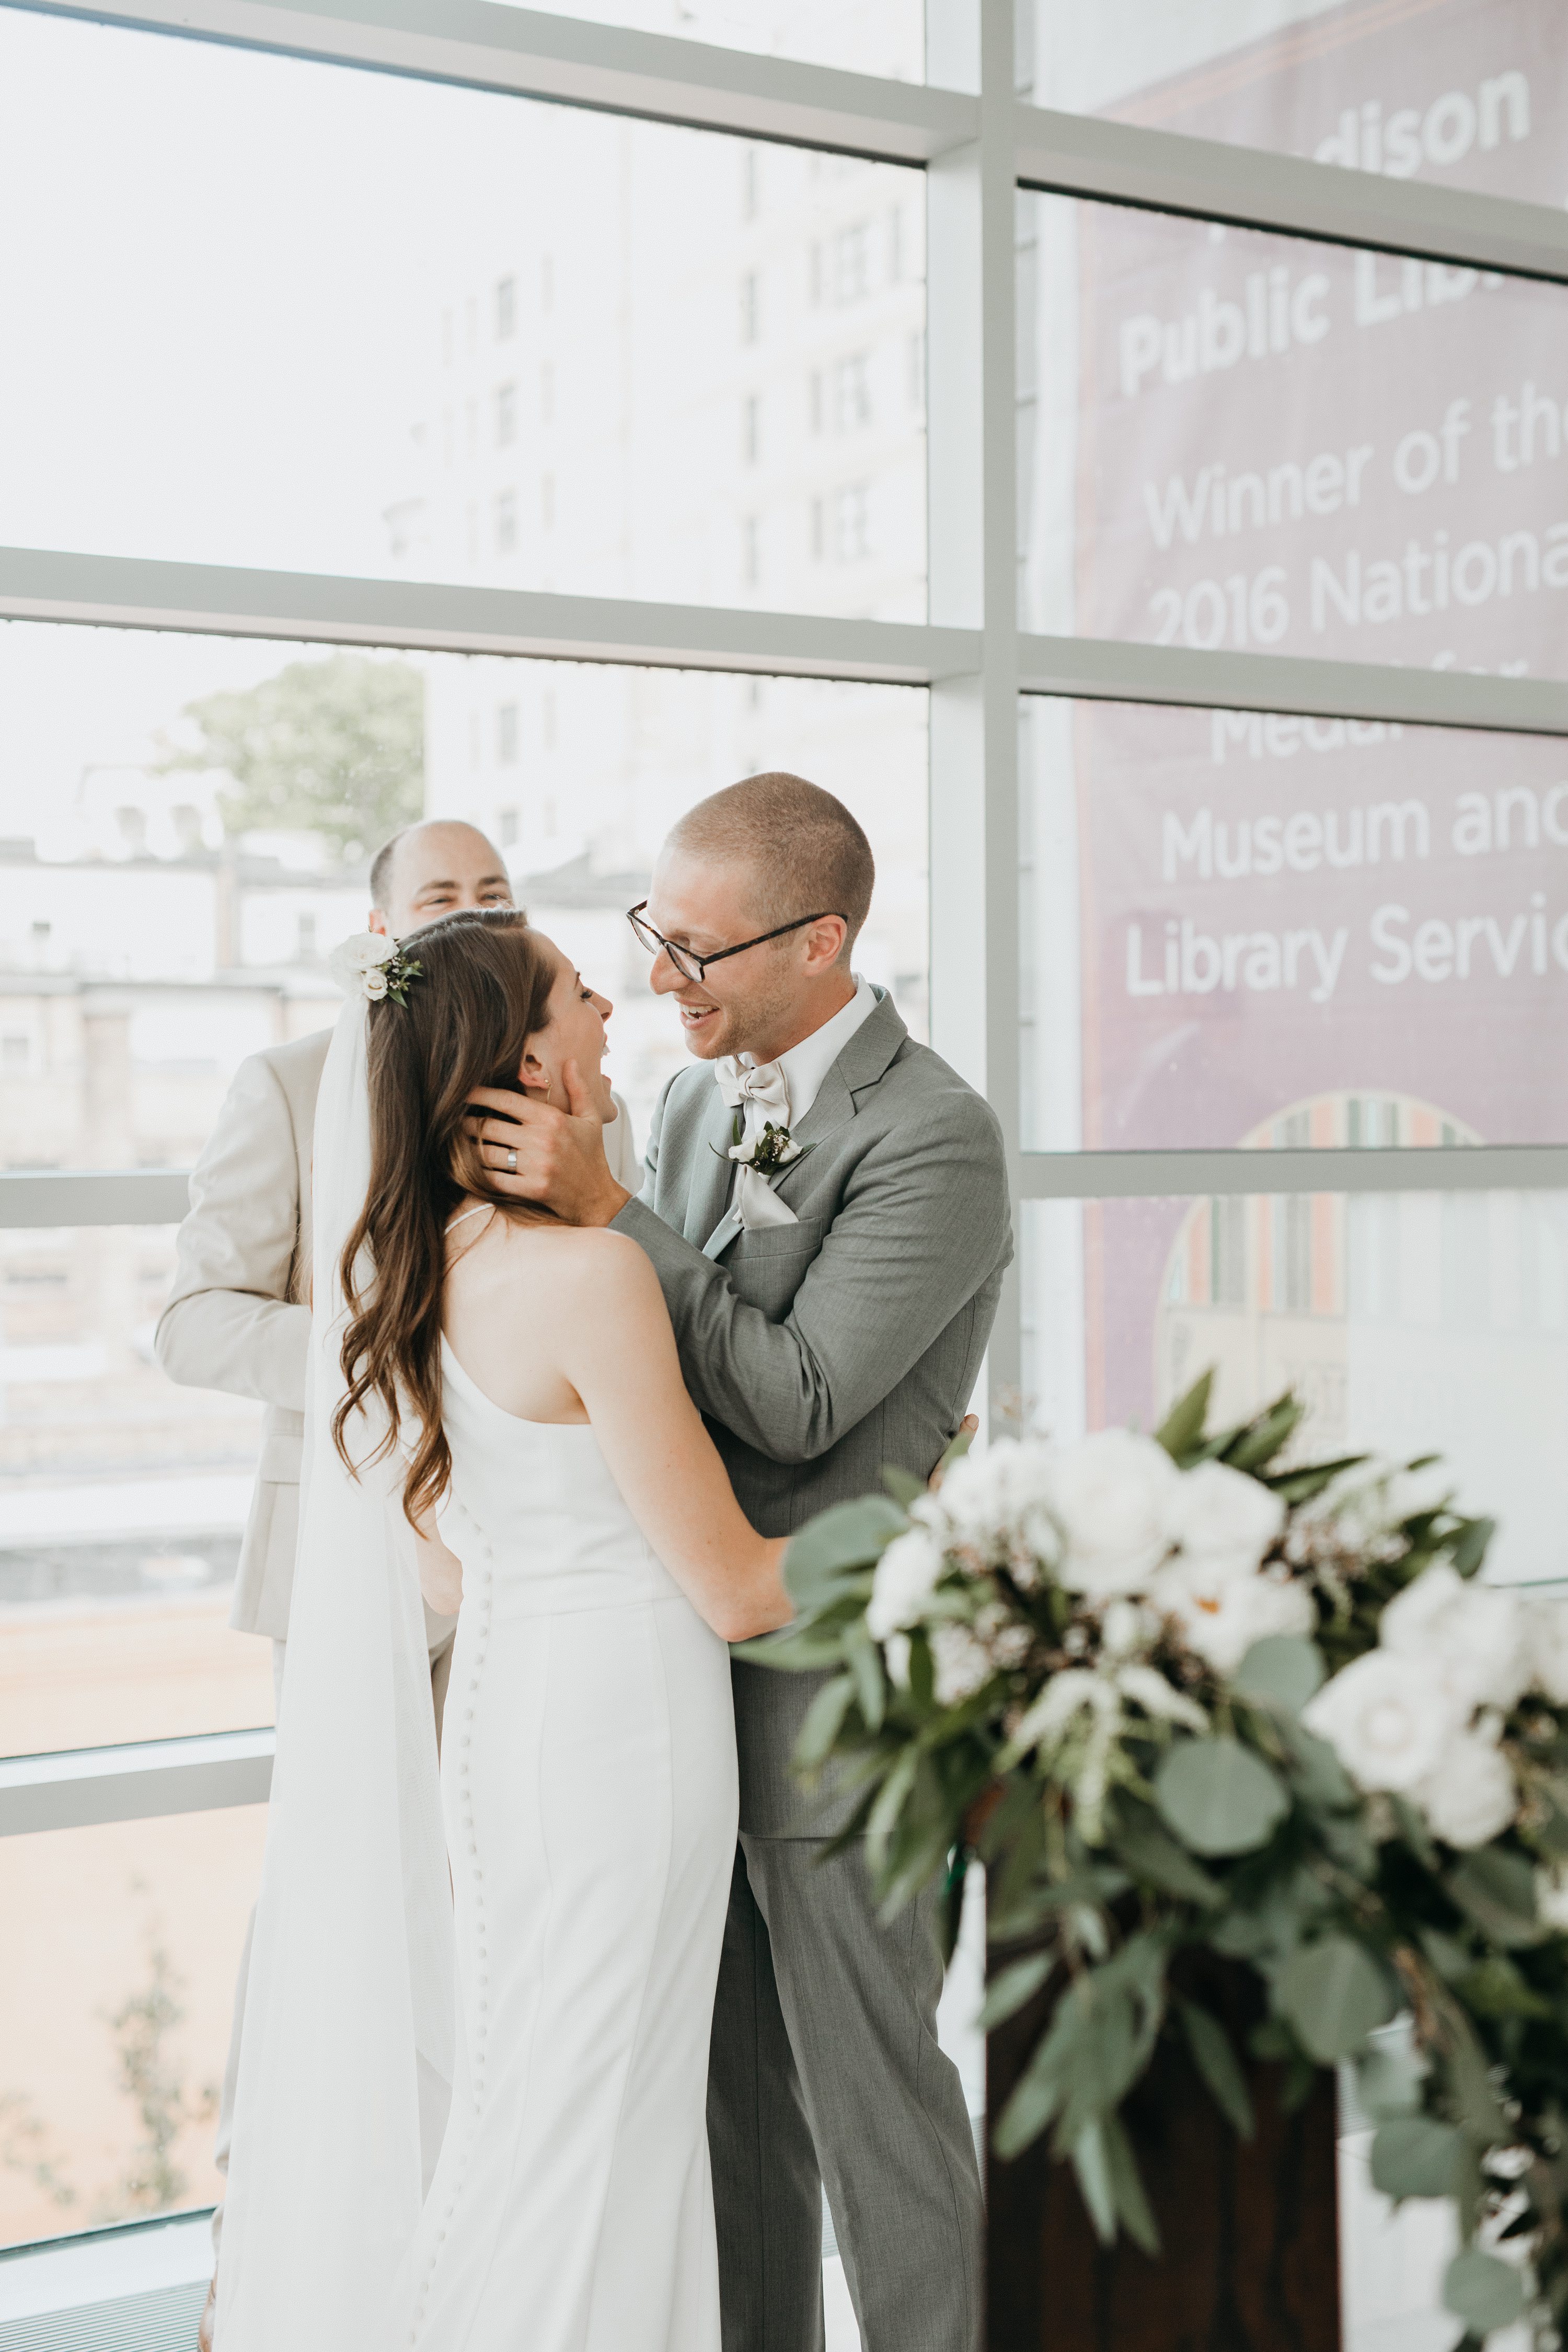 library wedding,madison central library wedding,madison public library wedding,madison wi wedding photographer